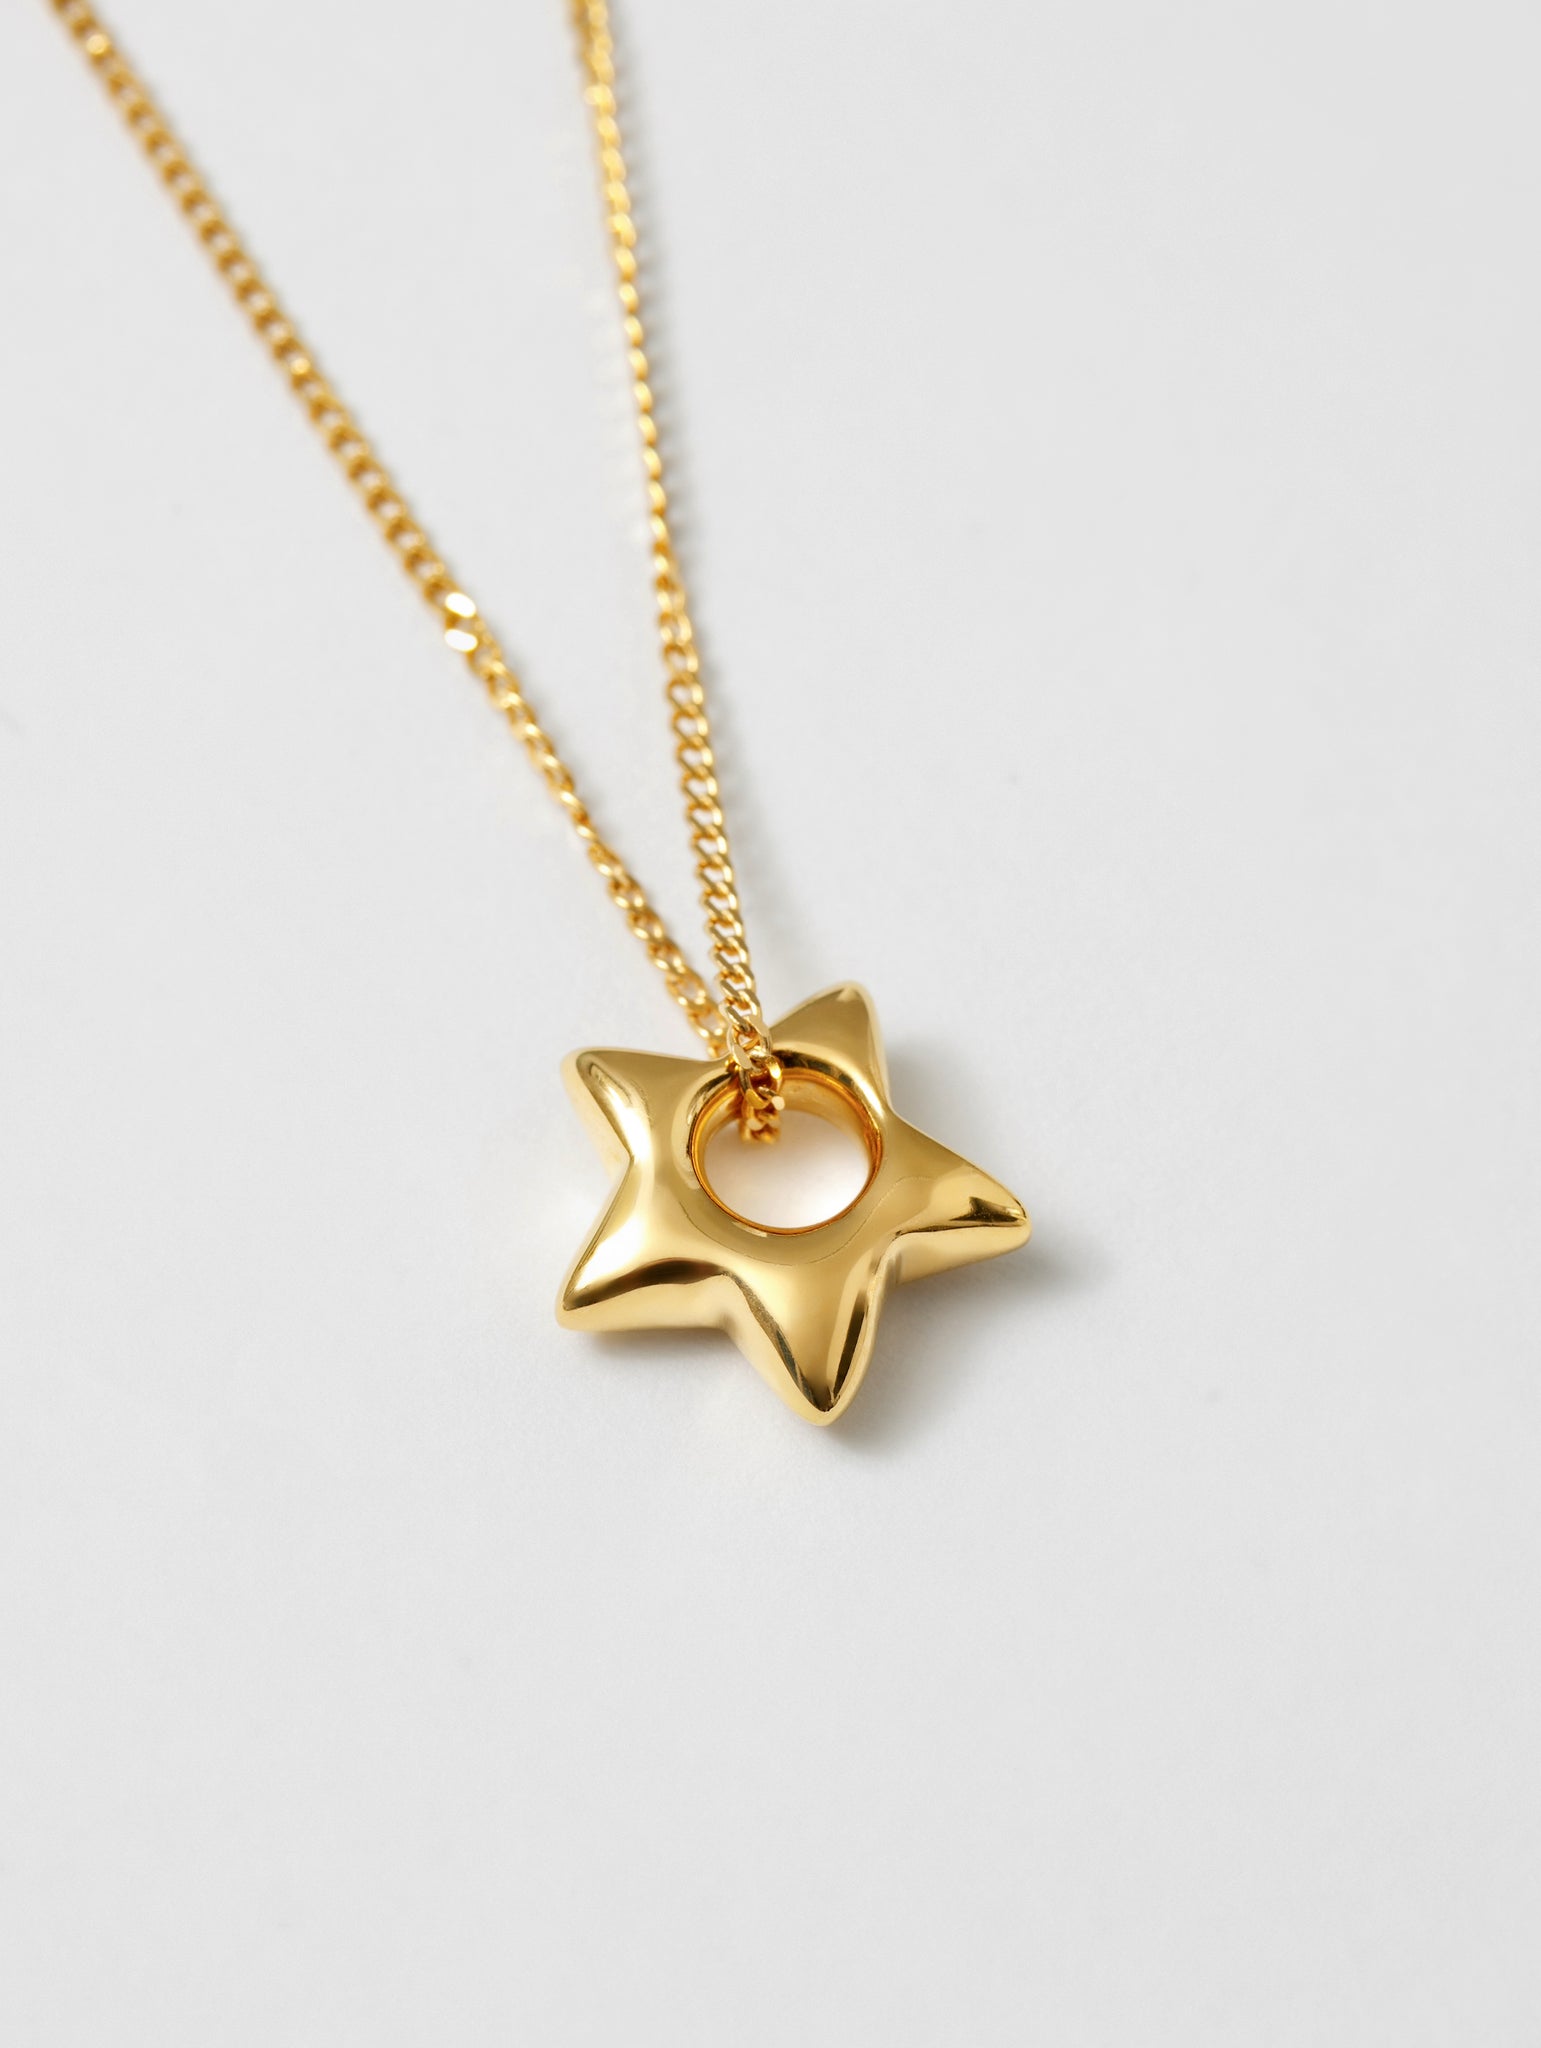 Wolf Circus Star Charm Pendant Necklace in 14k Gold | Recycled Metals-Necklaces-wolfcircus.com